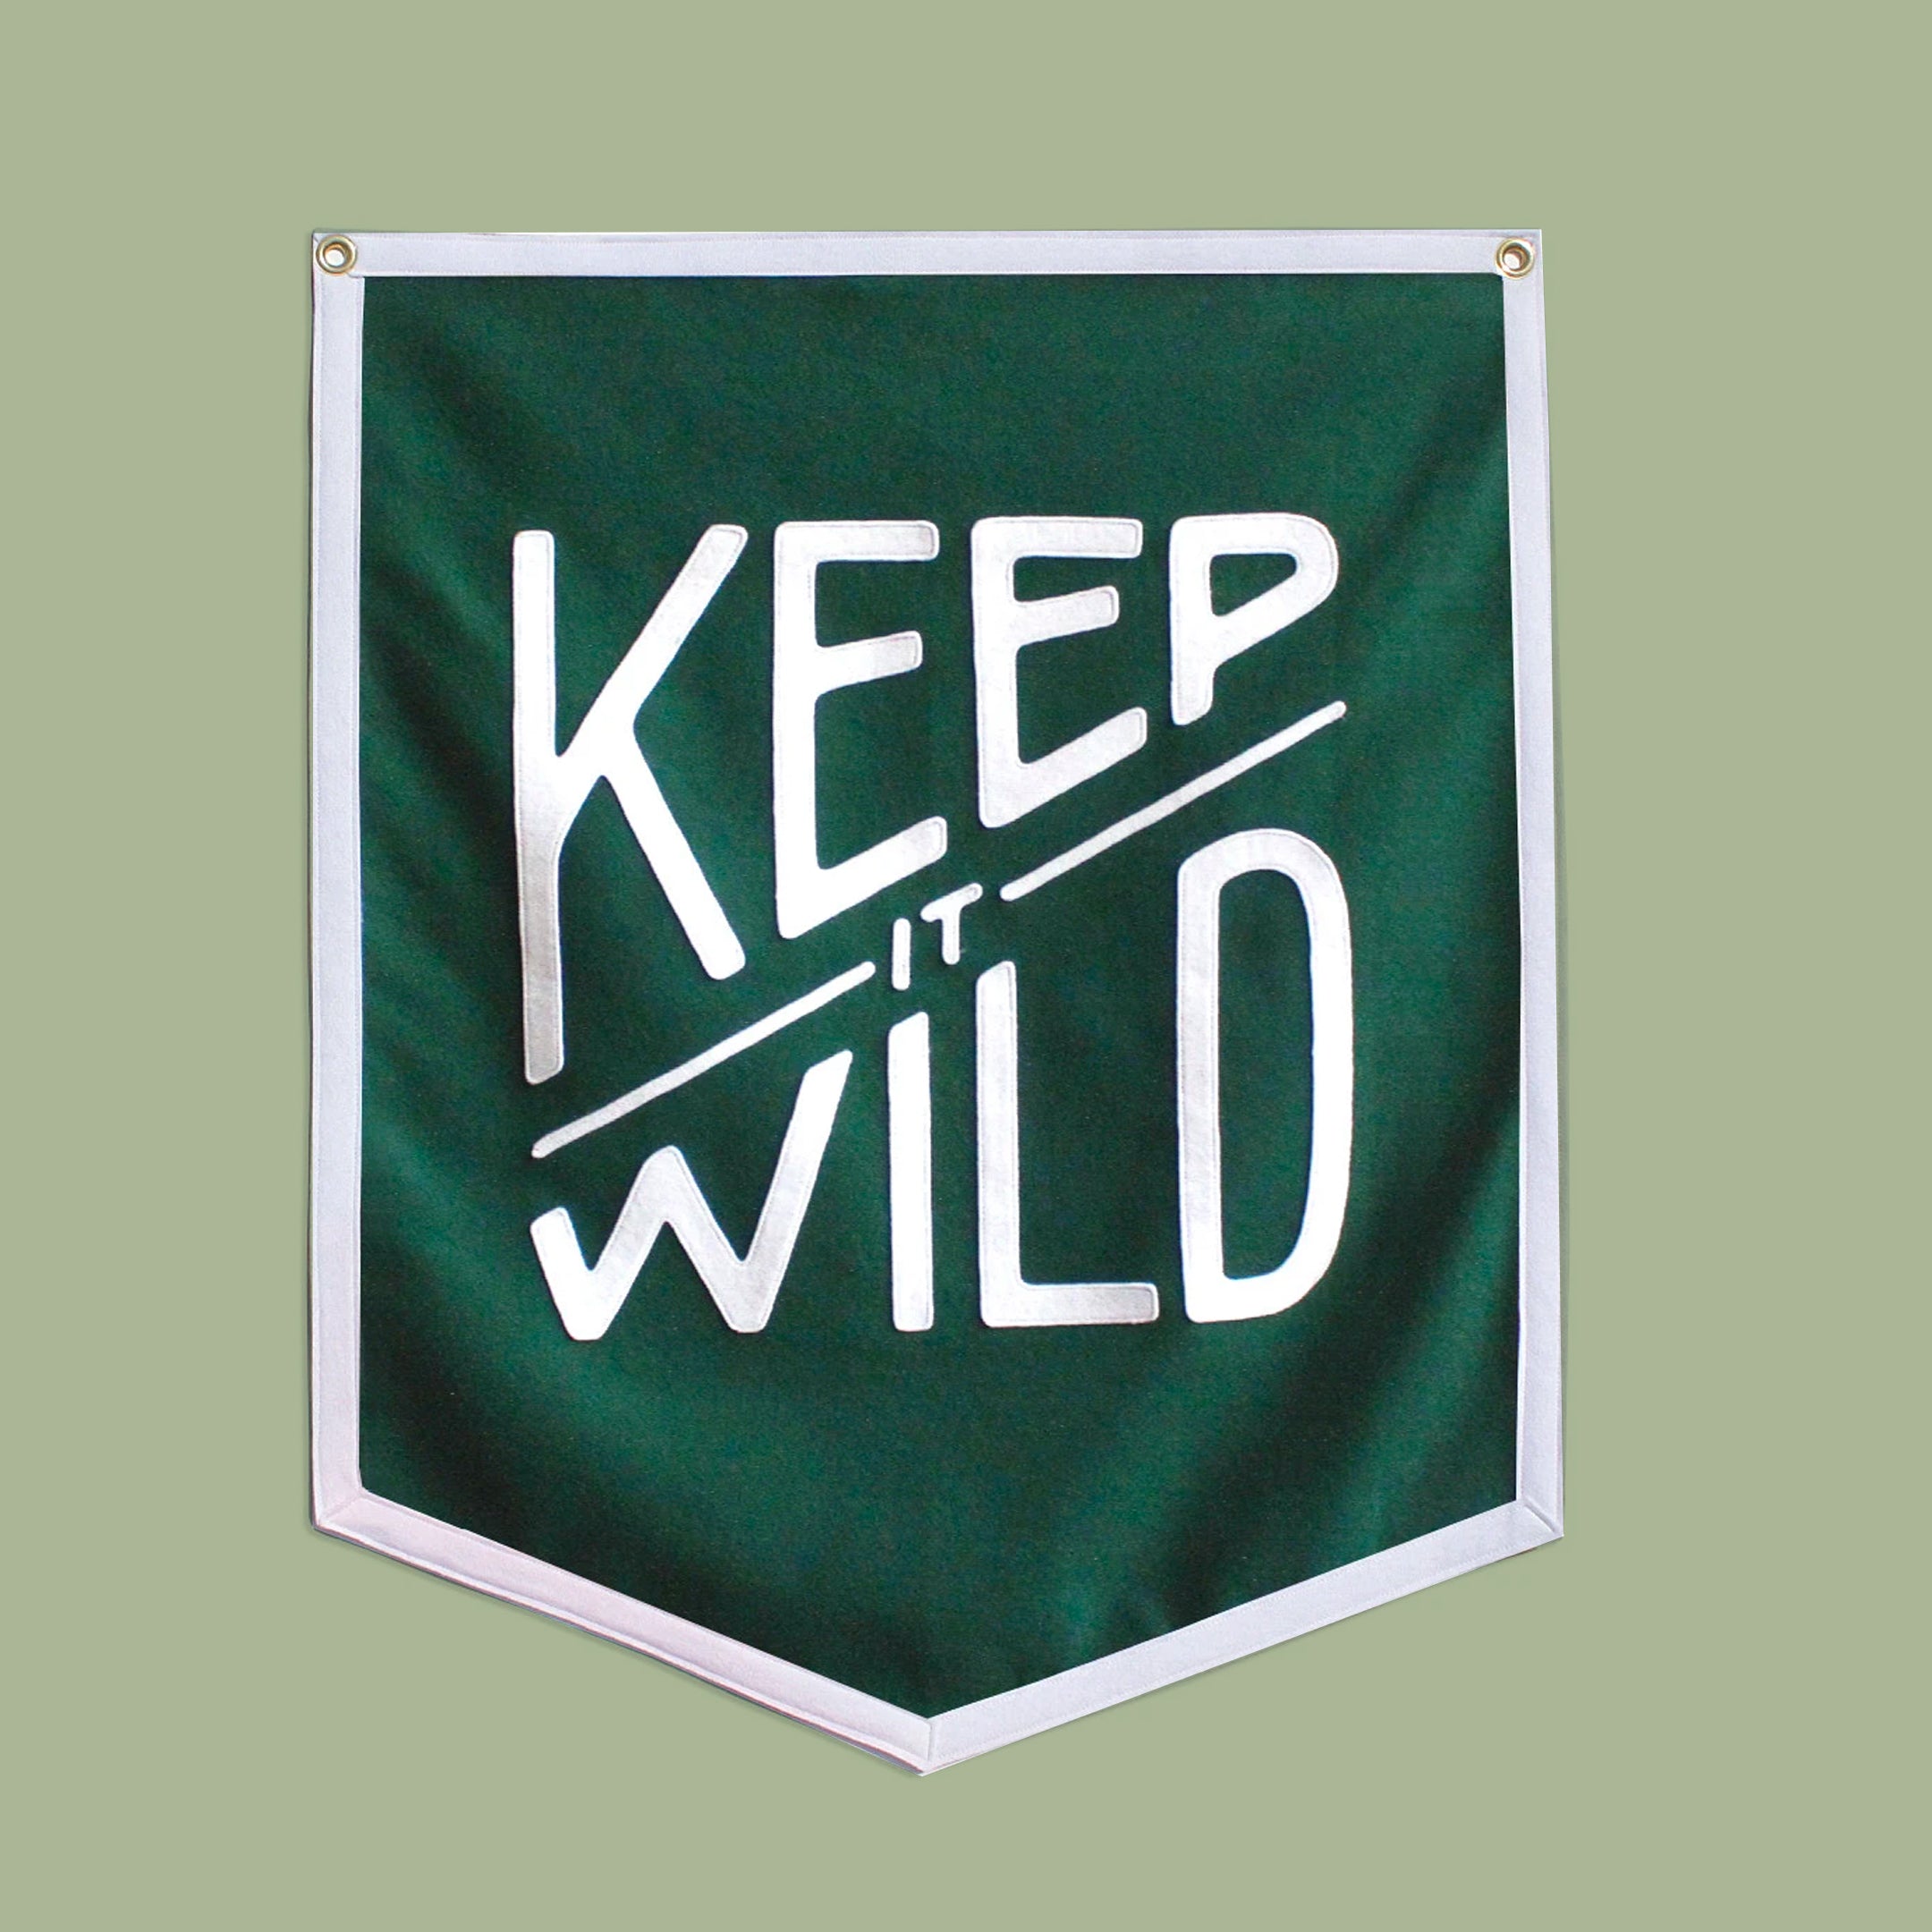 Oxford Pennant - Keep it Wild Championship Banner